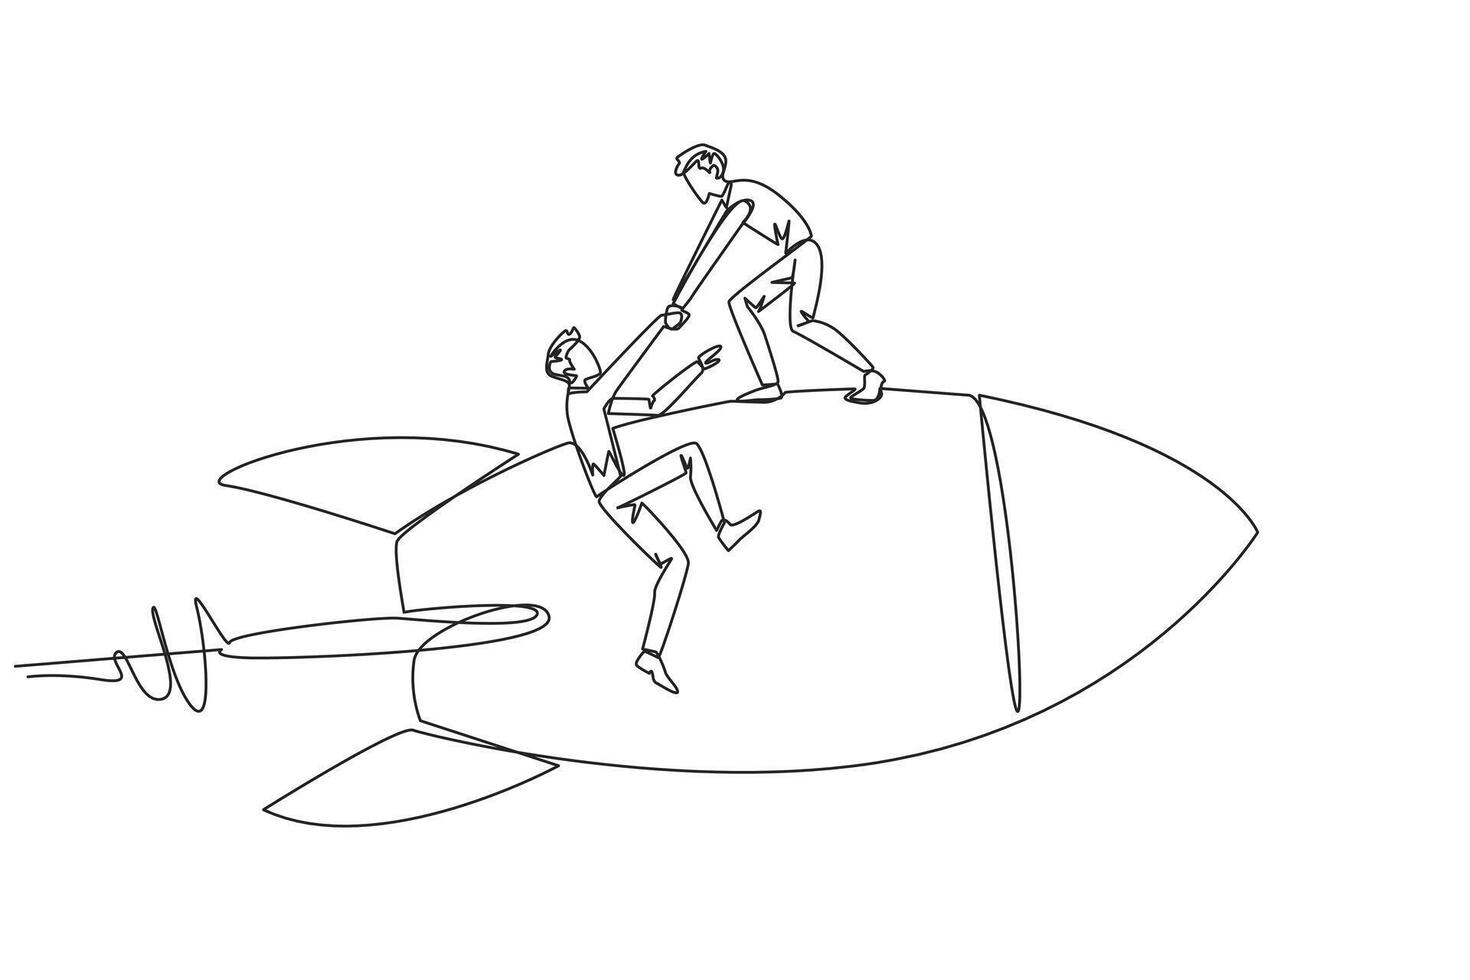 Single continuous line drawing businessman helps colleague climb flying rocket. Metaphor help in managing company branches. Skyrocketed like the previous business. One line design illustration vector